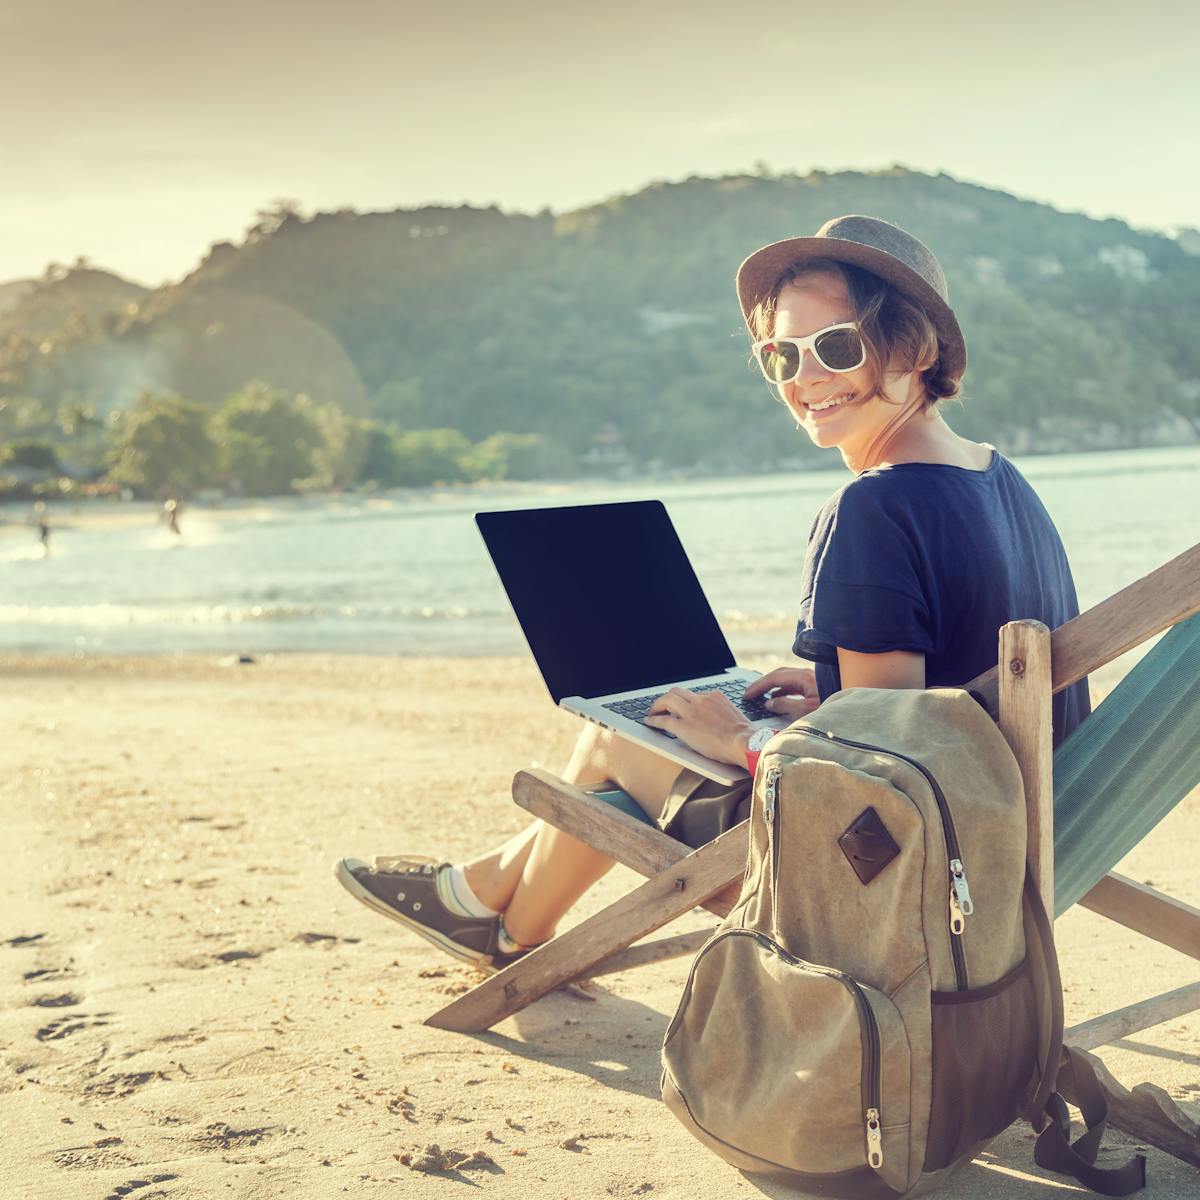 Digital nomads: what it's really like to work while travelling the world